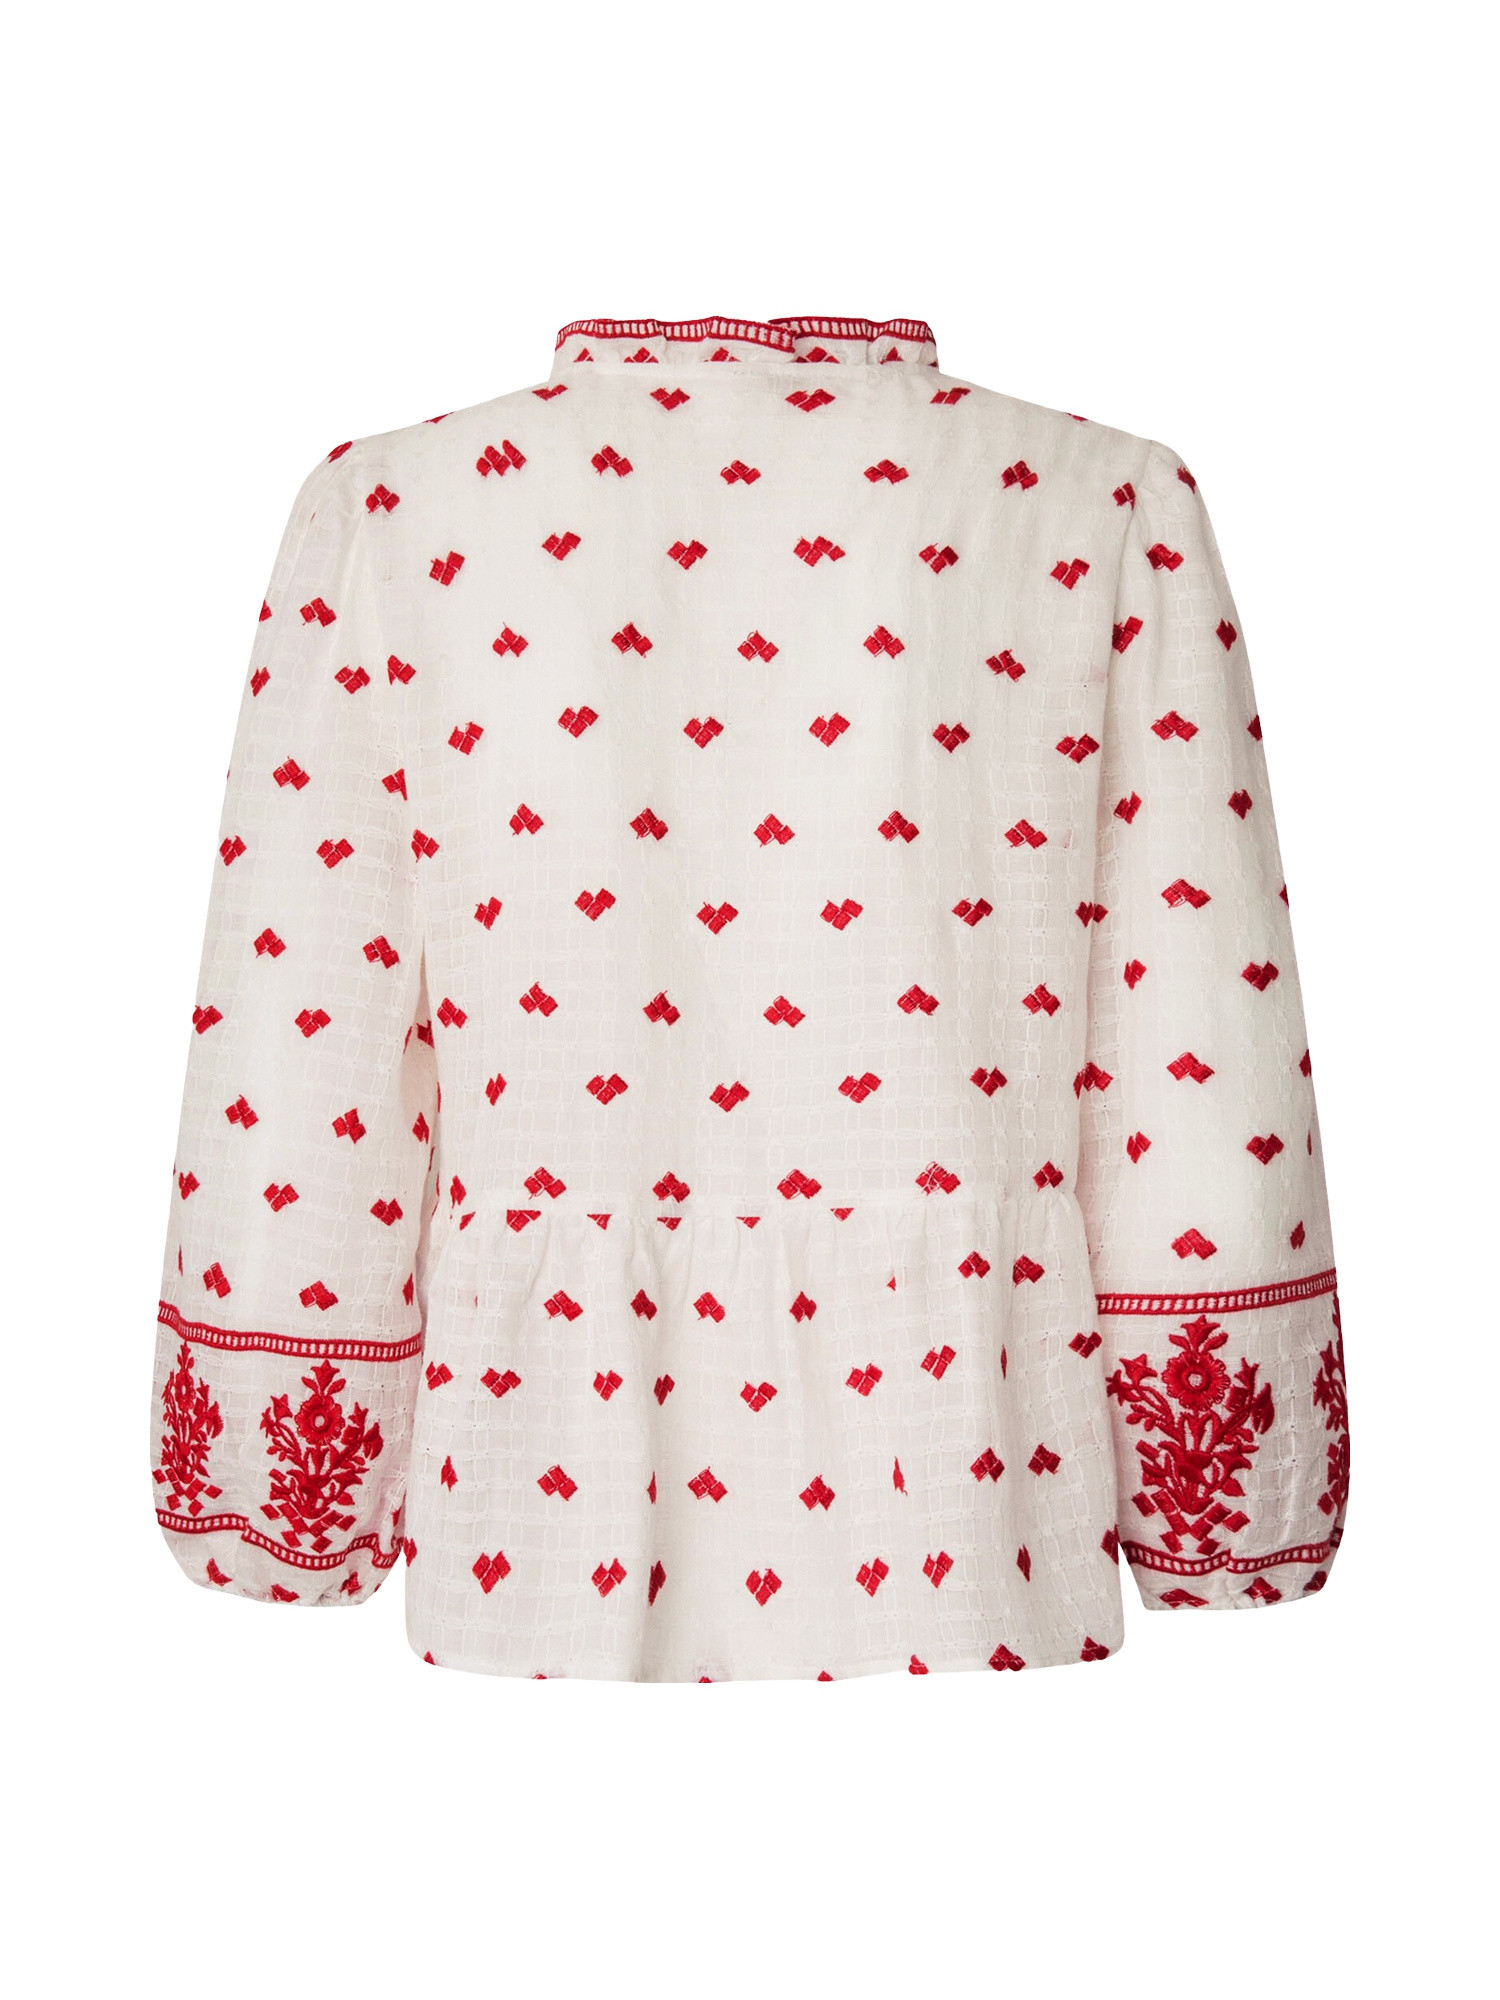 Pepe Jeans - Patterned blouse, Red, large image number 1